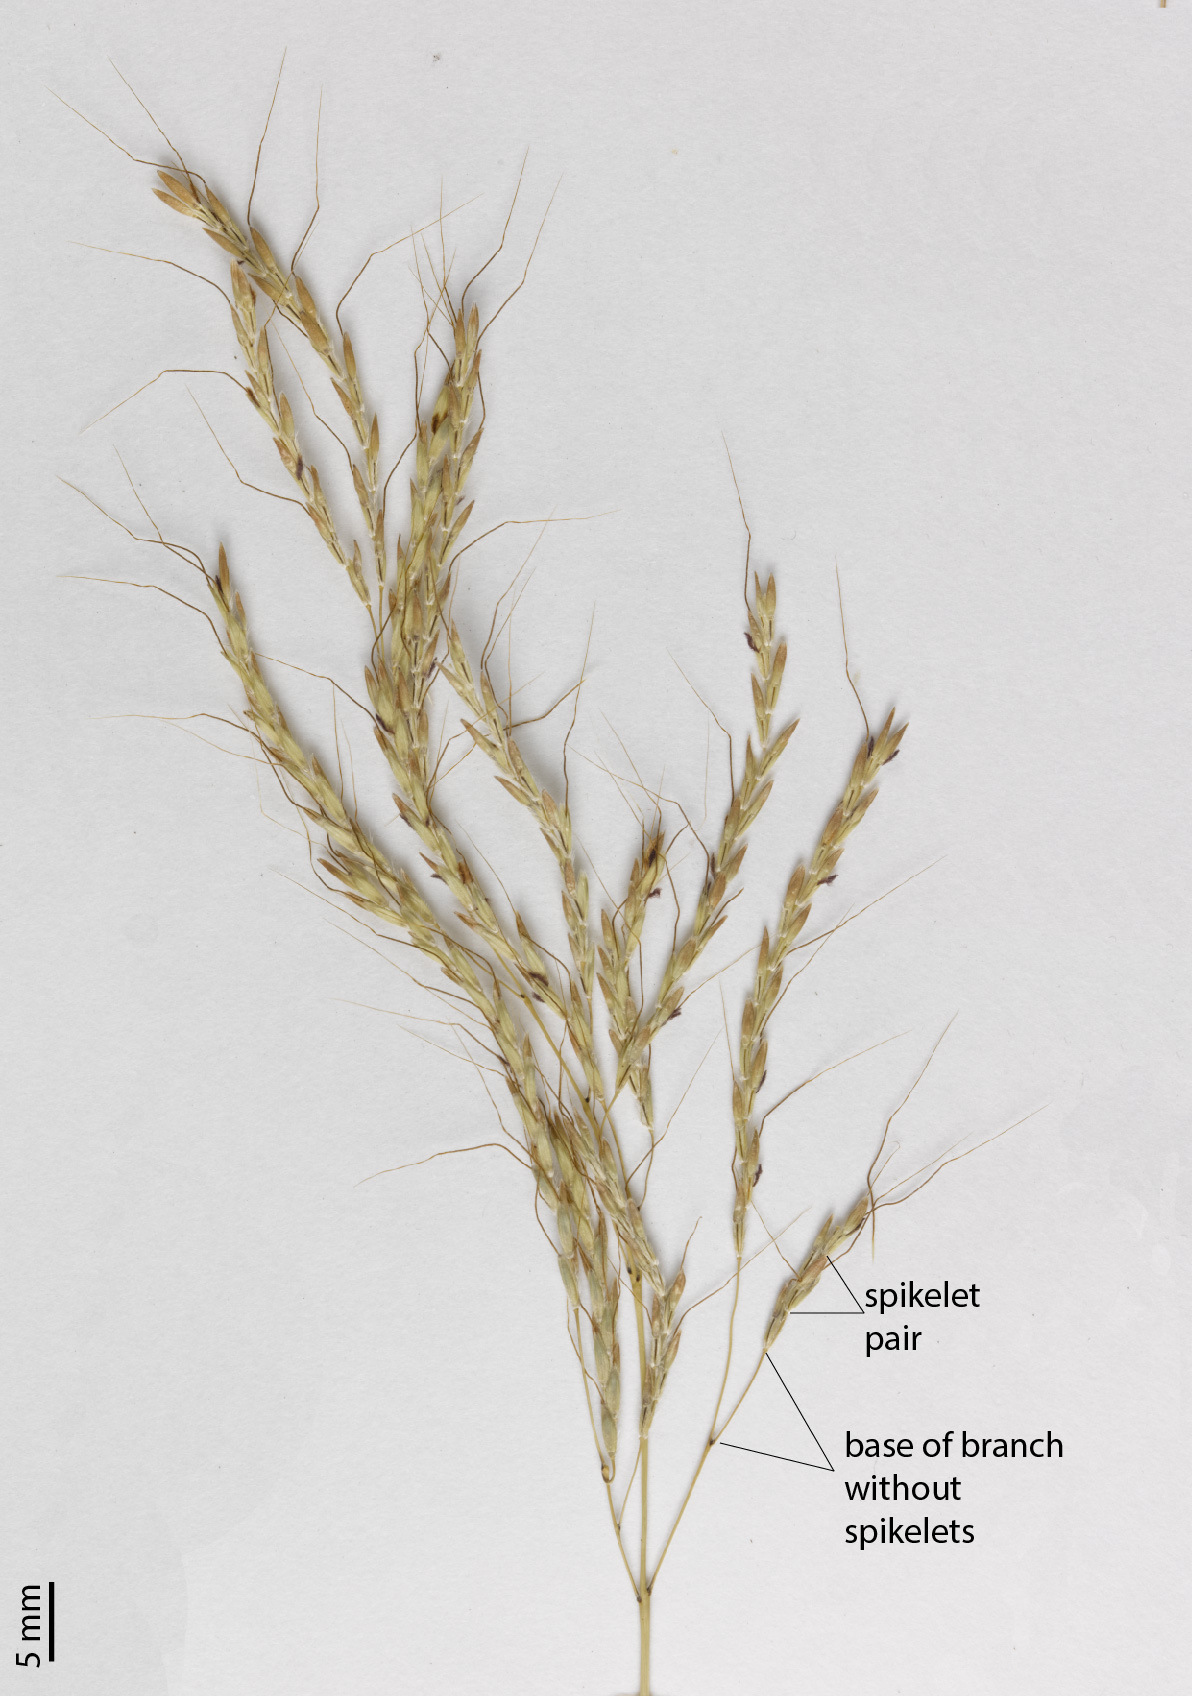 Fig. 5. Inflorescence of a pressed specimen of Dichanthium annulatum (QRS88153) showing spikelet pair and base of inflorescence branch without spikelets.